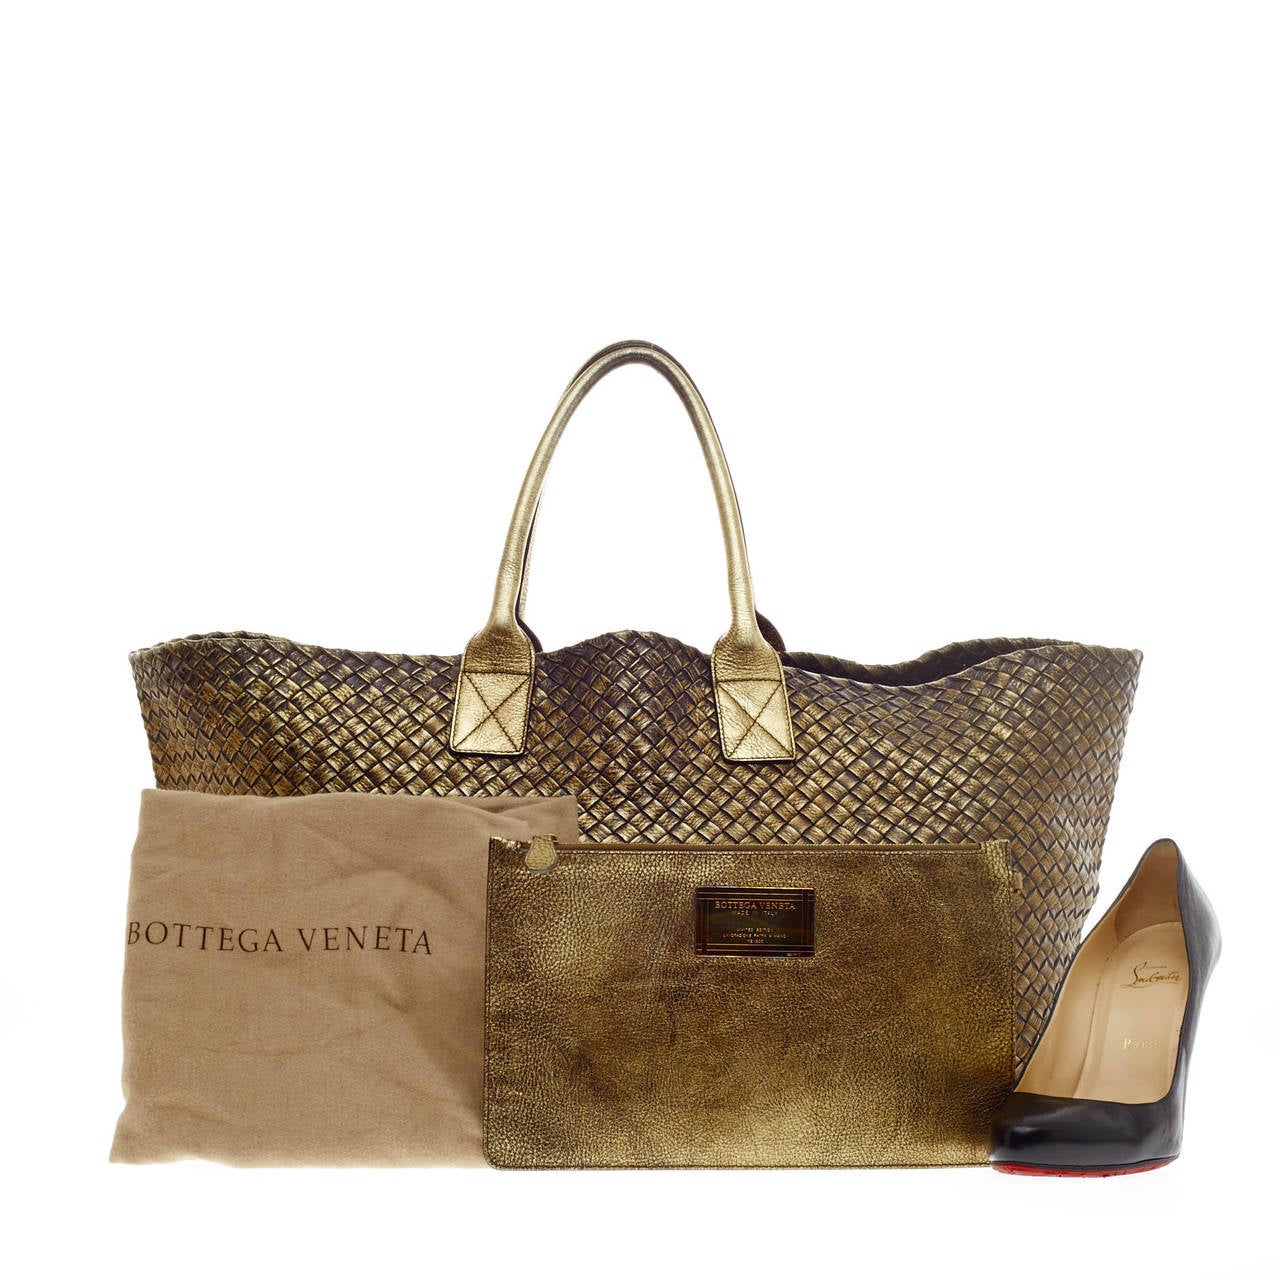 This authentic Bottega Veneta Cabat Tote Metallic Intrecciato Nappa Large is a statement piece you can surely take from day to night. Beautifully crafted in aged gold-bronze metallic shade in Bottega Veneta's signature intrecciato woven method, this